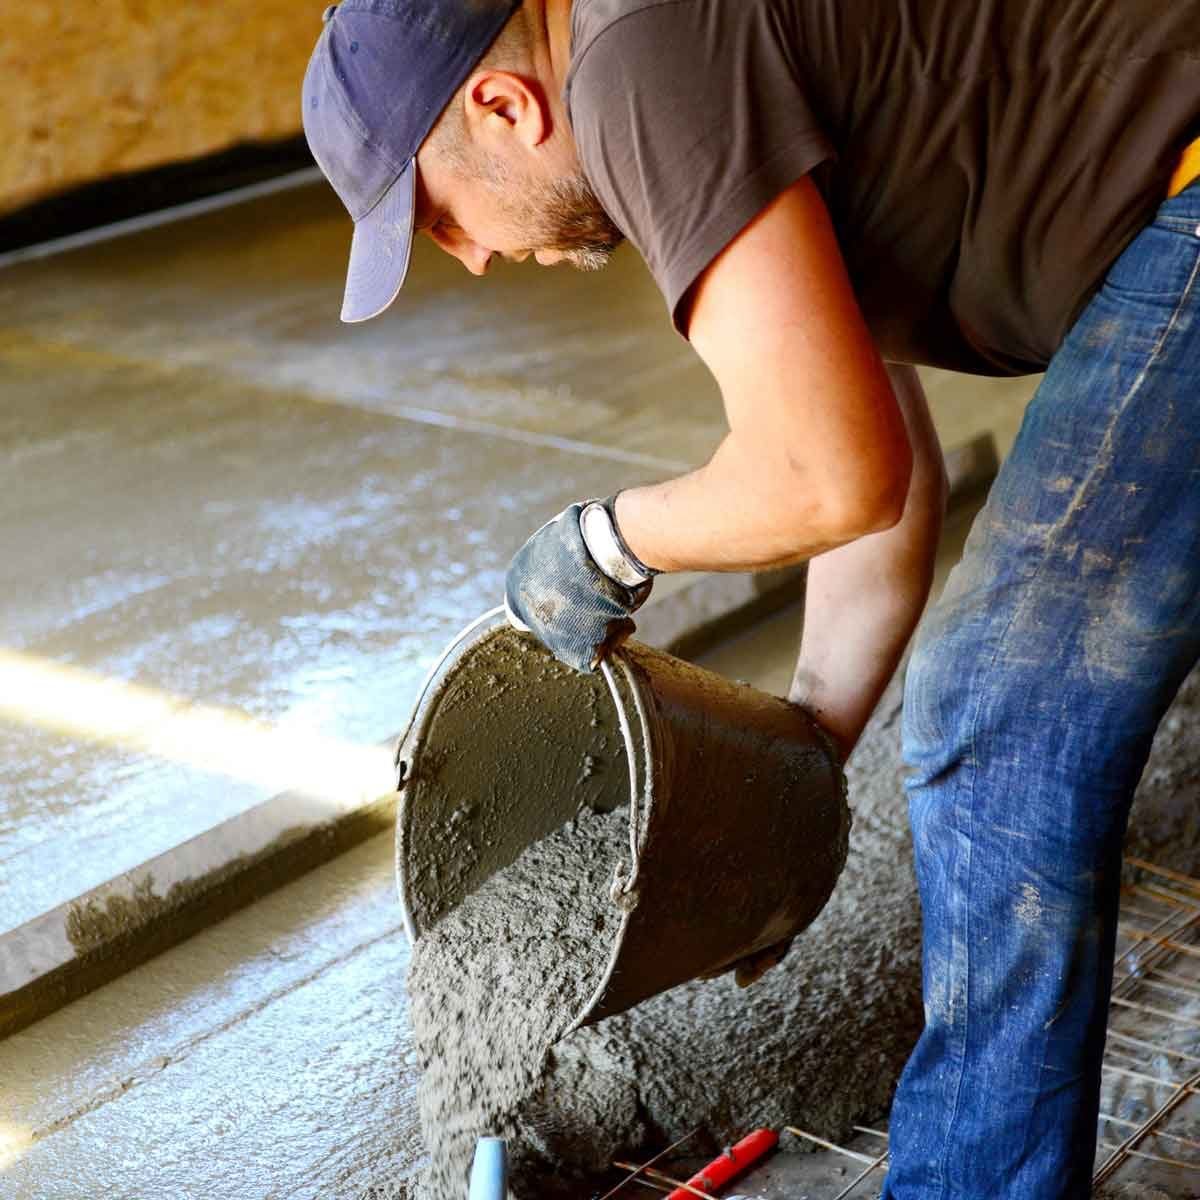 11 Points That You Should Always Check on a Cement Bag Before